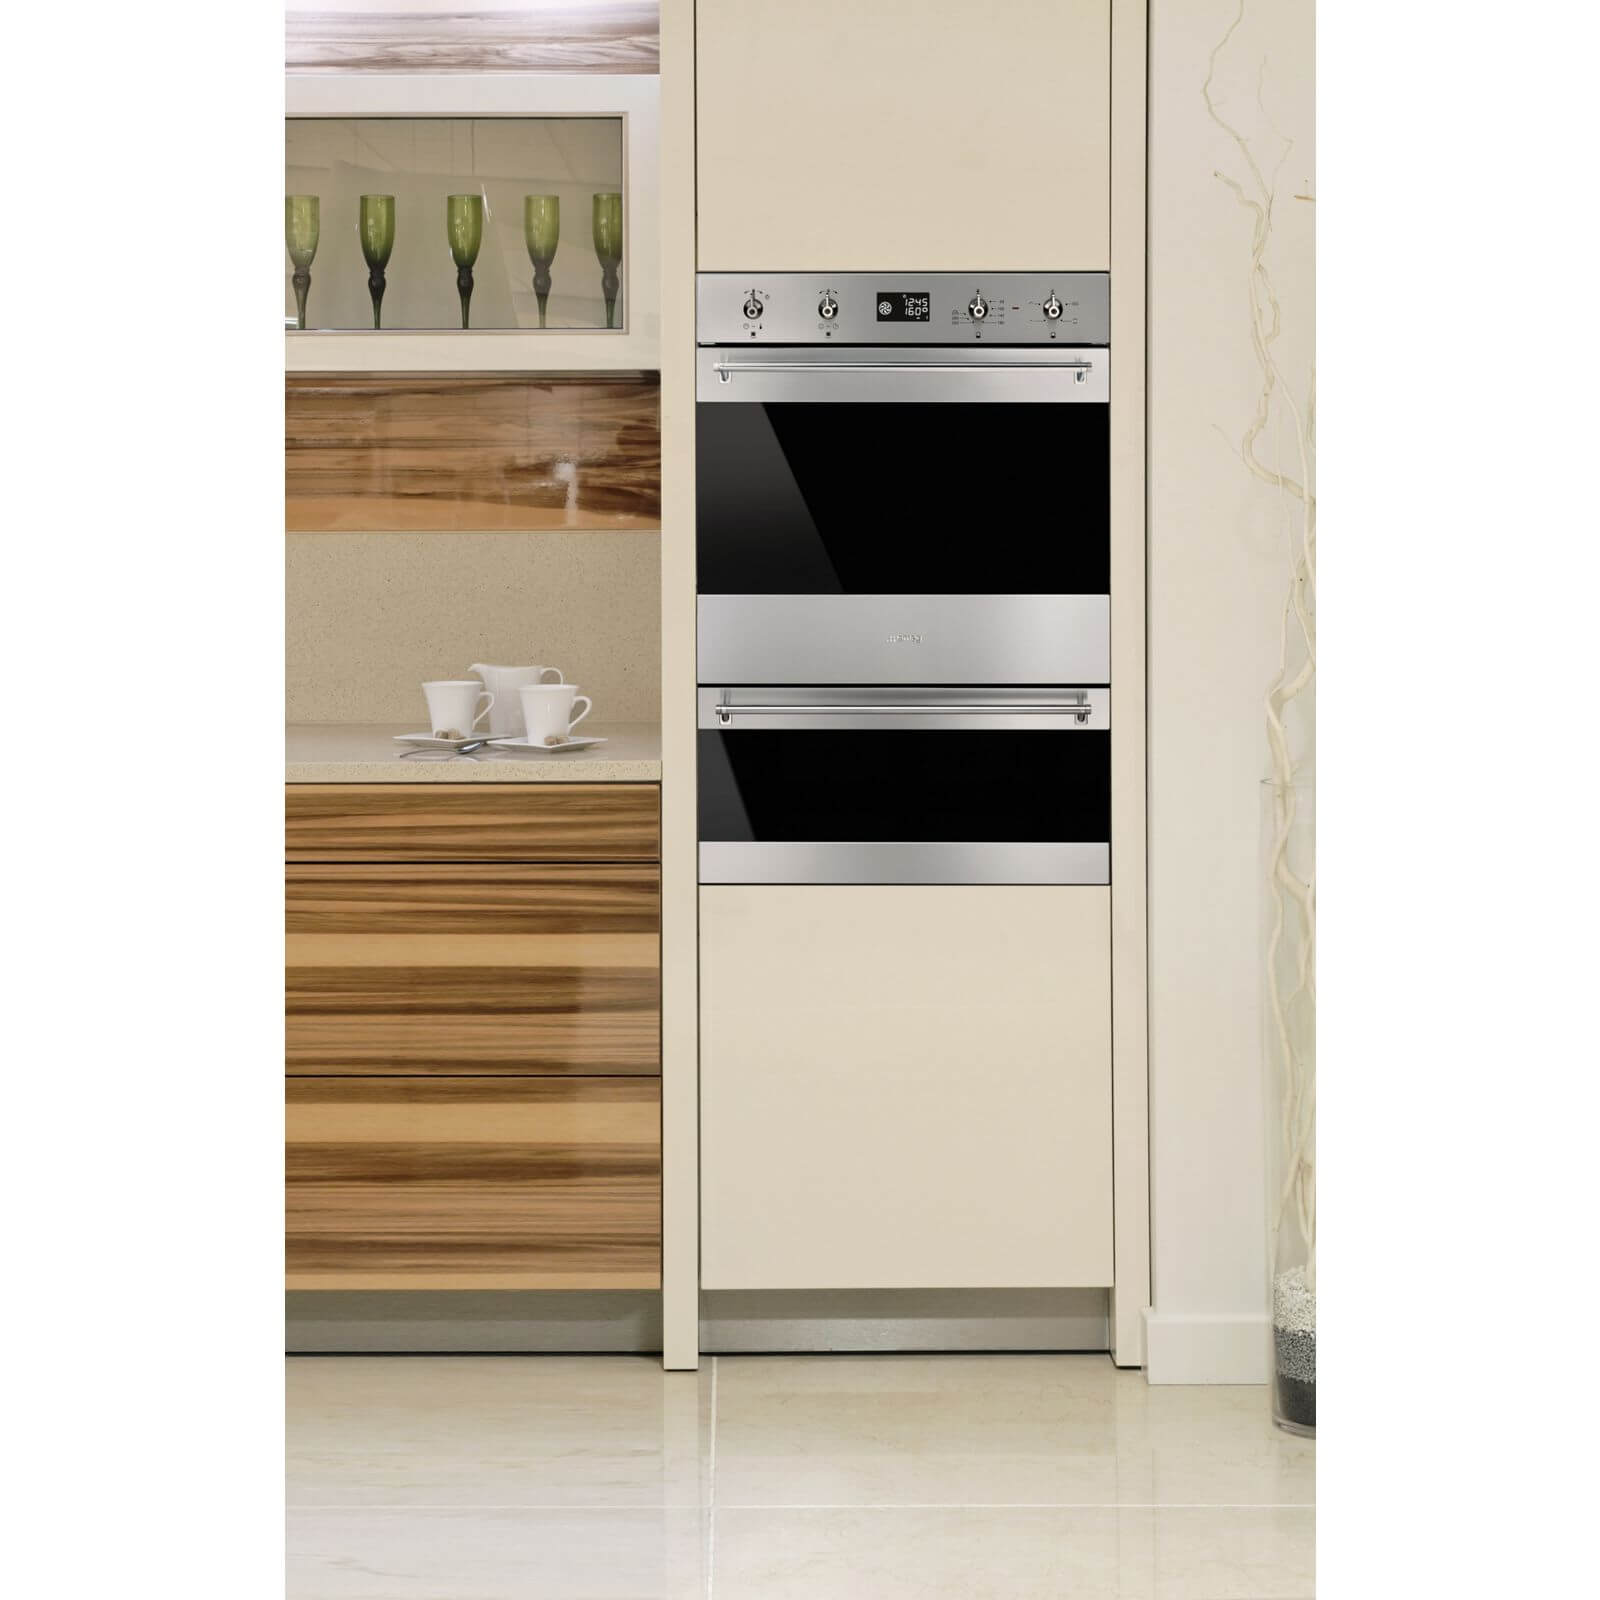 Smeg DOSP6390X 60cm Classic Double Pyrolytic Electric Oven - Stainless Steel